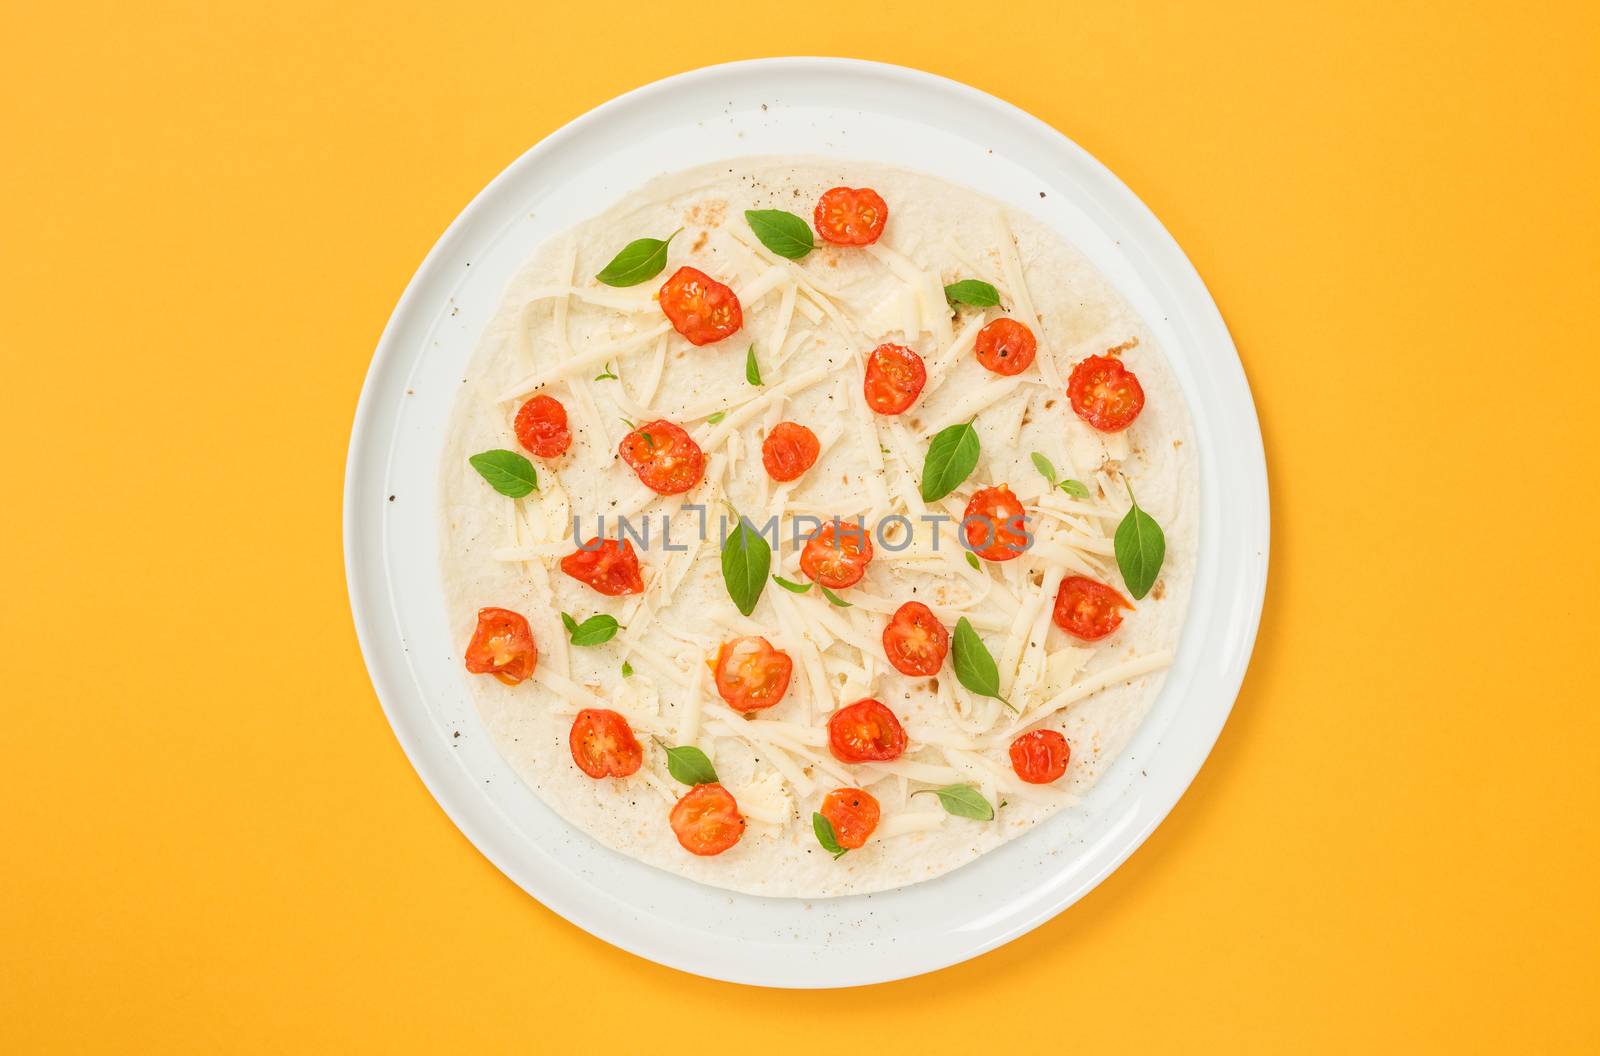 Tortilla preparation. Vegetarian tortilla with tomatoes, cheese and basil, on bright yellow background.